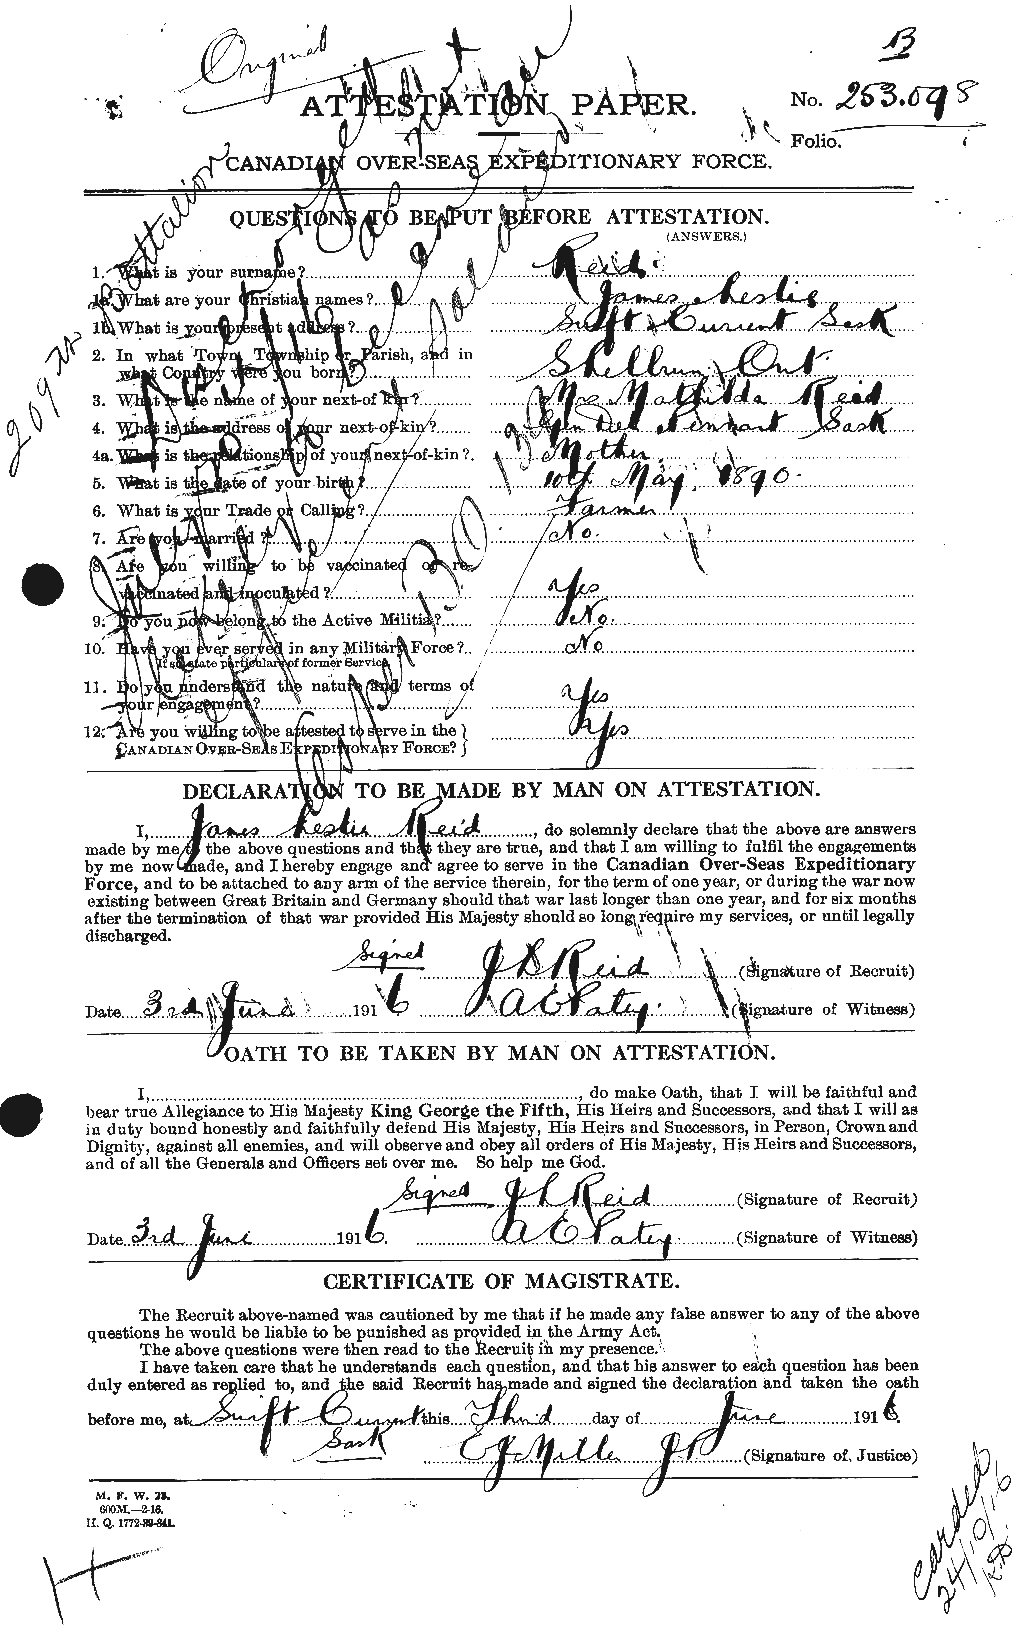 Personnel Records of the First World War - CEF 598723a